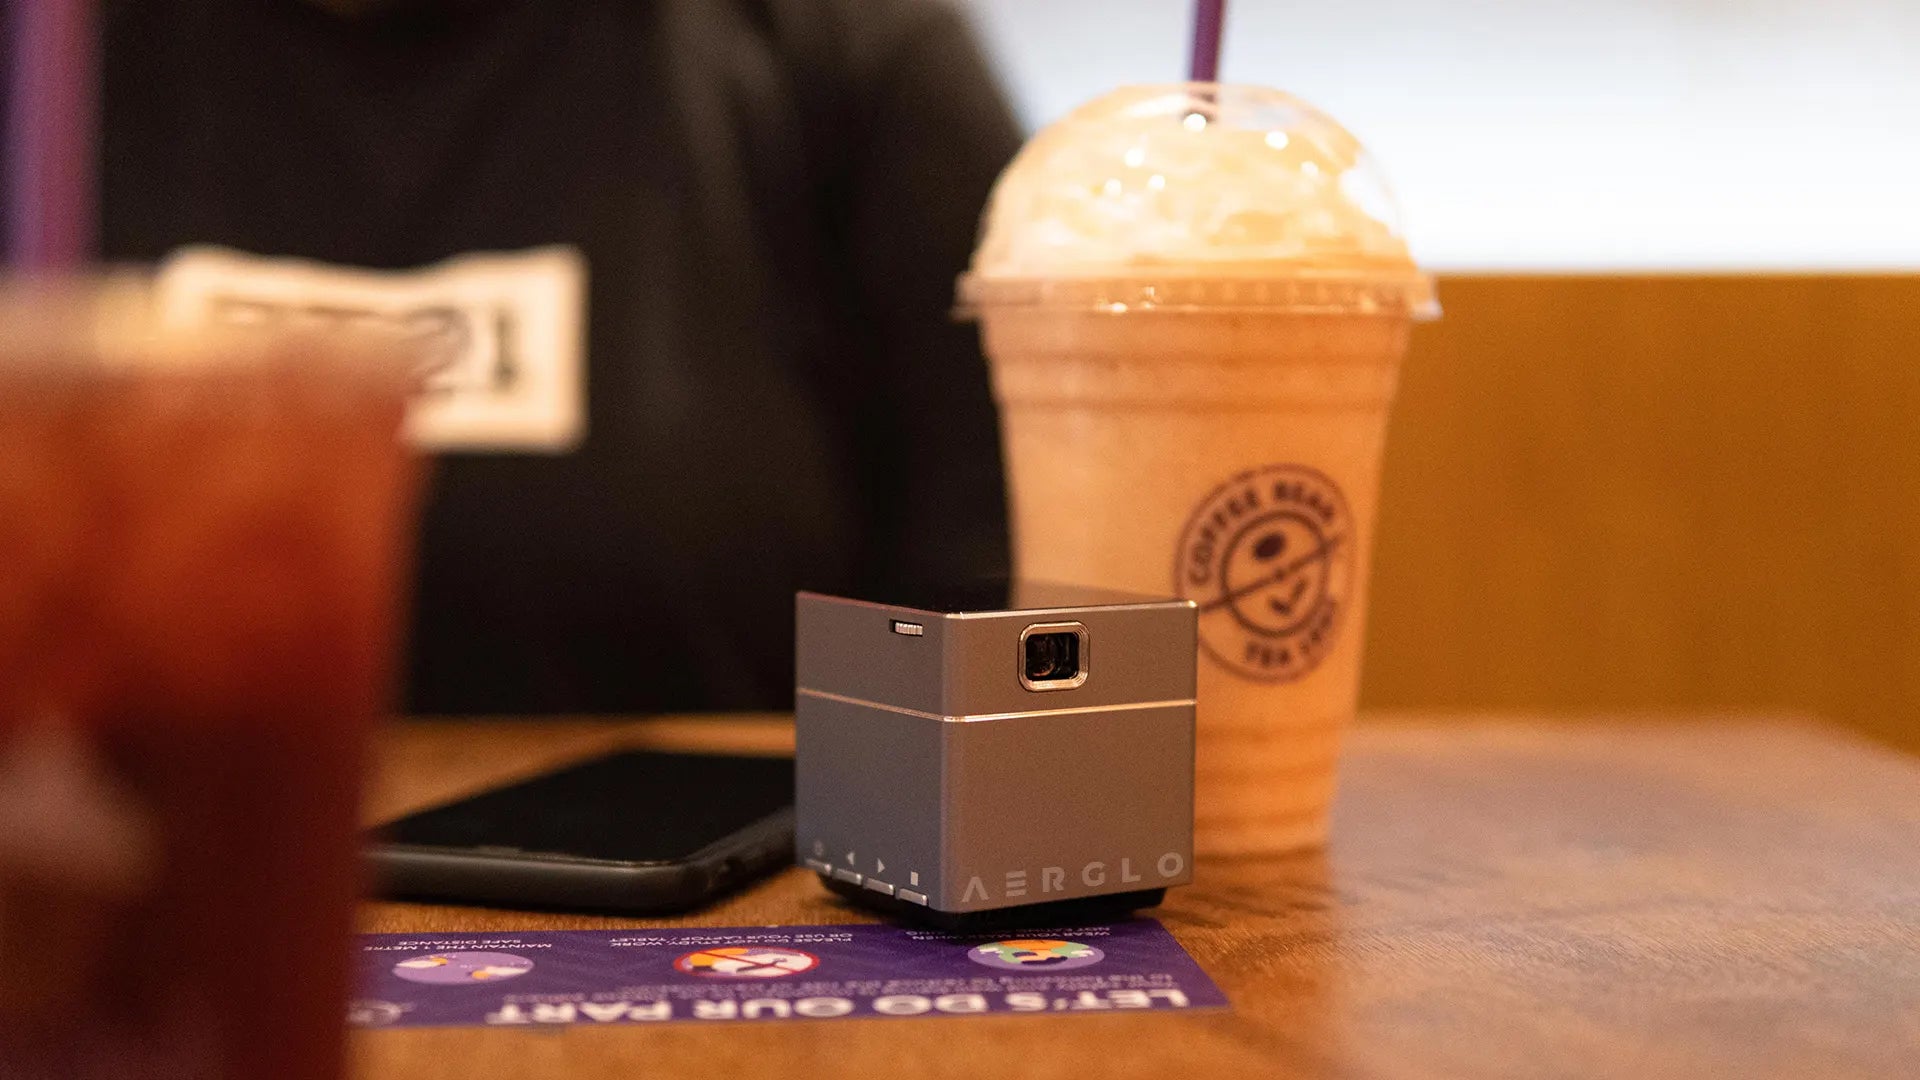 Aerglo Neutrino Smart Mini Projector - at a drink cafe round table with smoothie drink